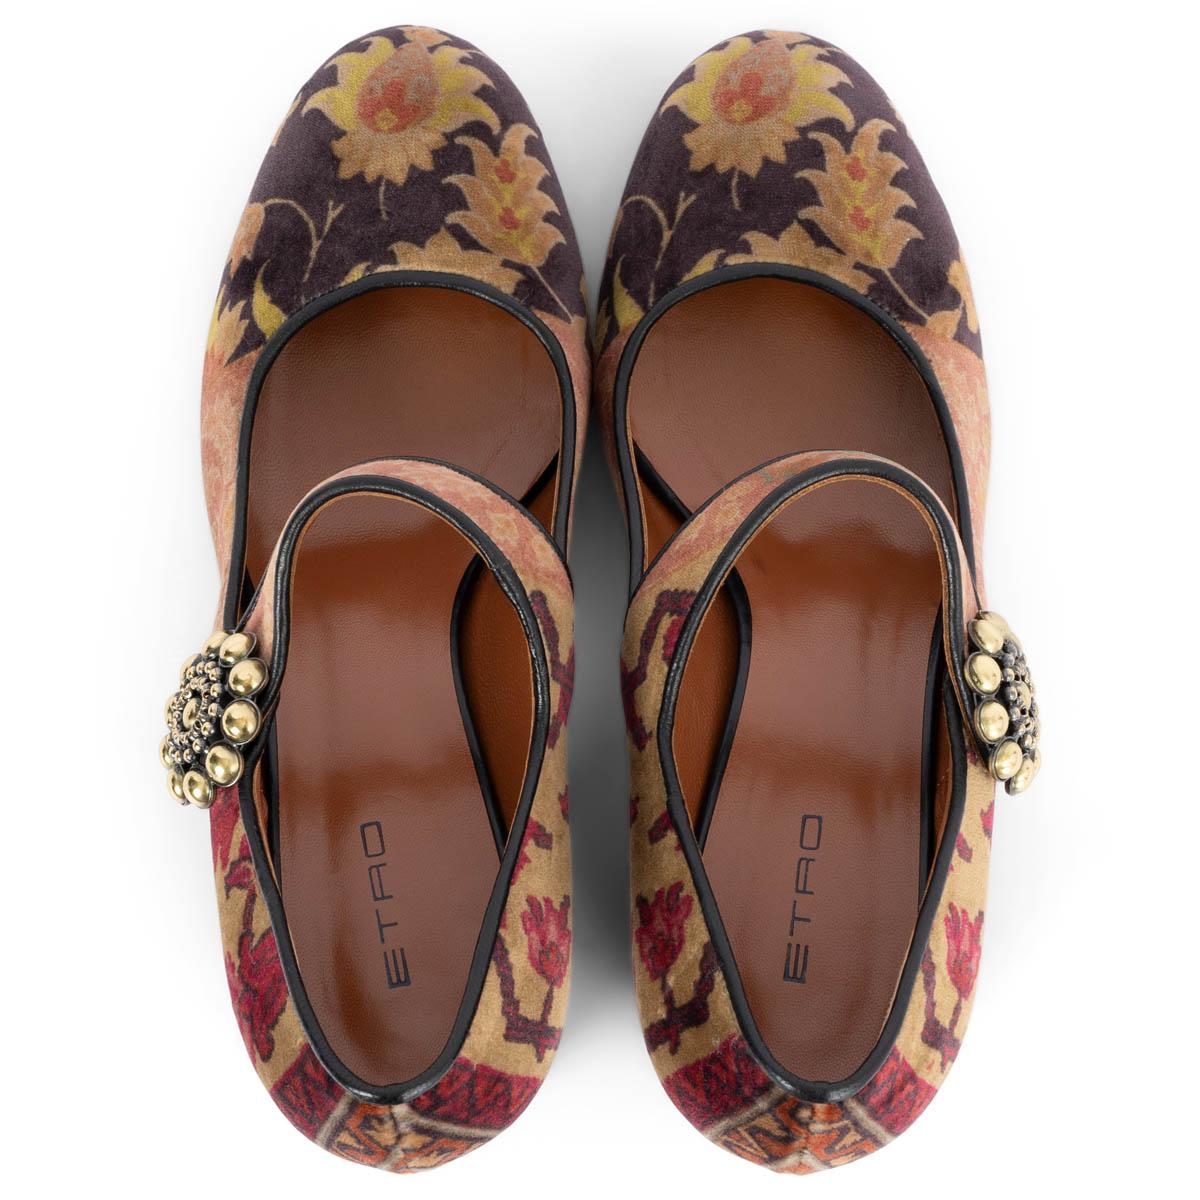 ETRO earthy FLORAL VELVET MARY JANE Pumps Shoes 38 1